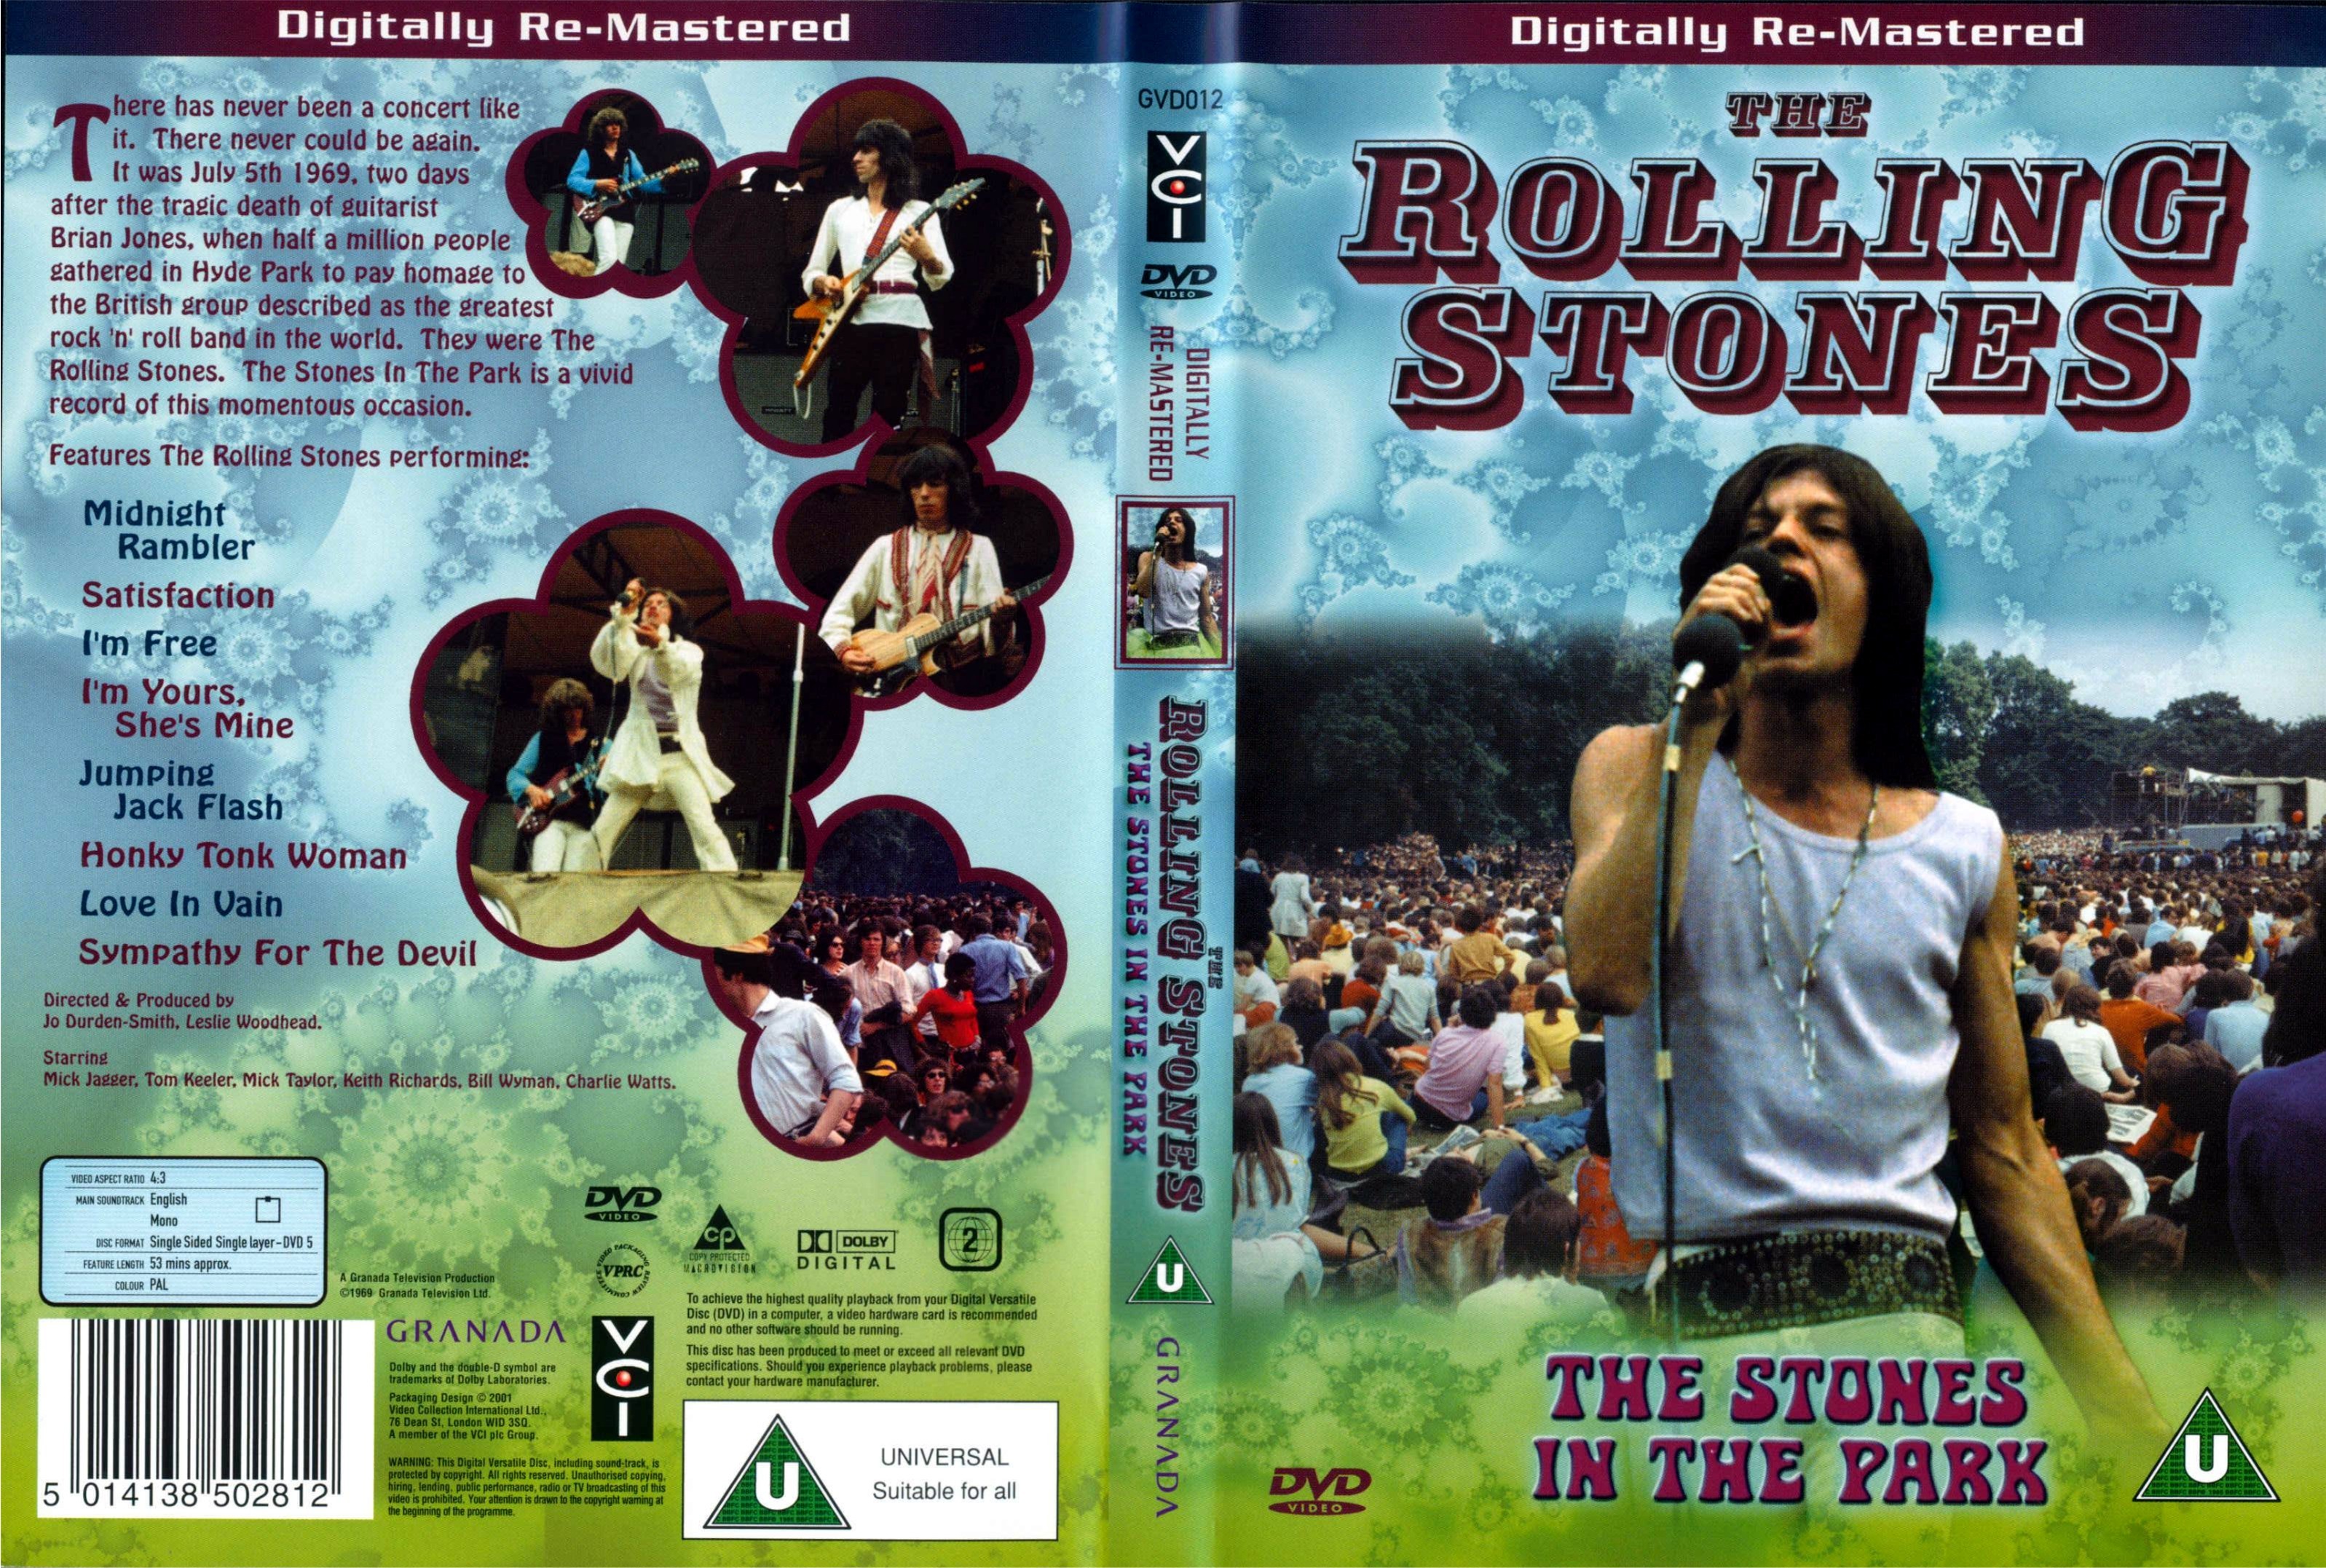 Jaquette DVD Rolling Stones The stones in the park